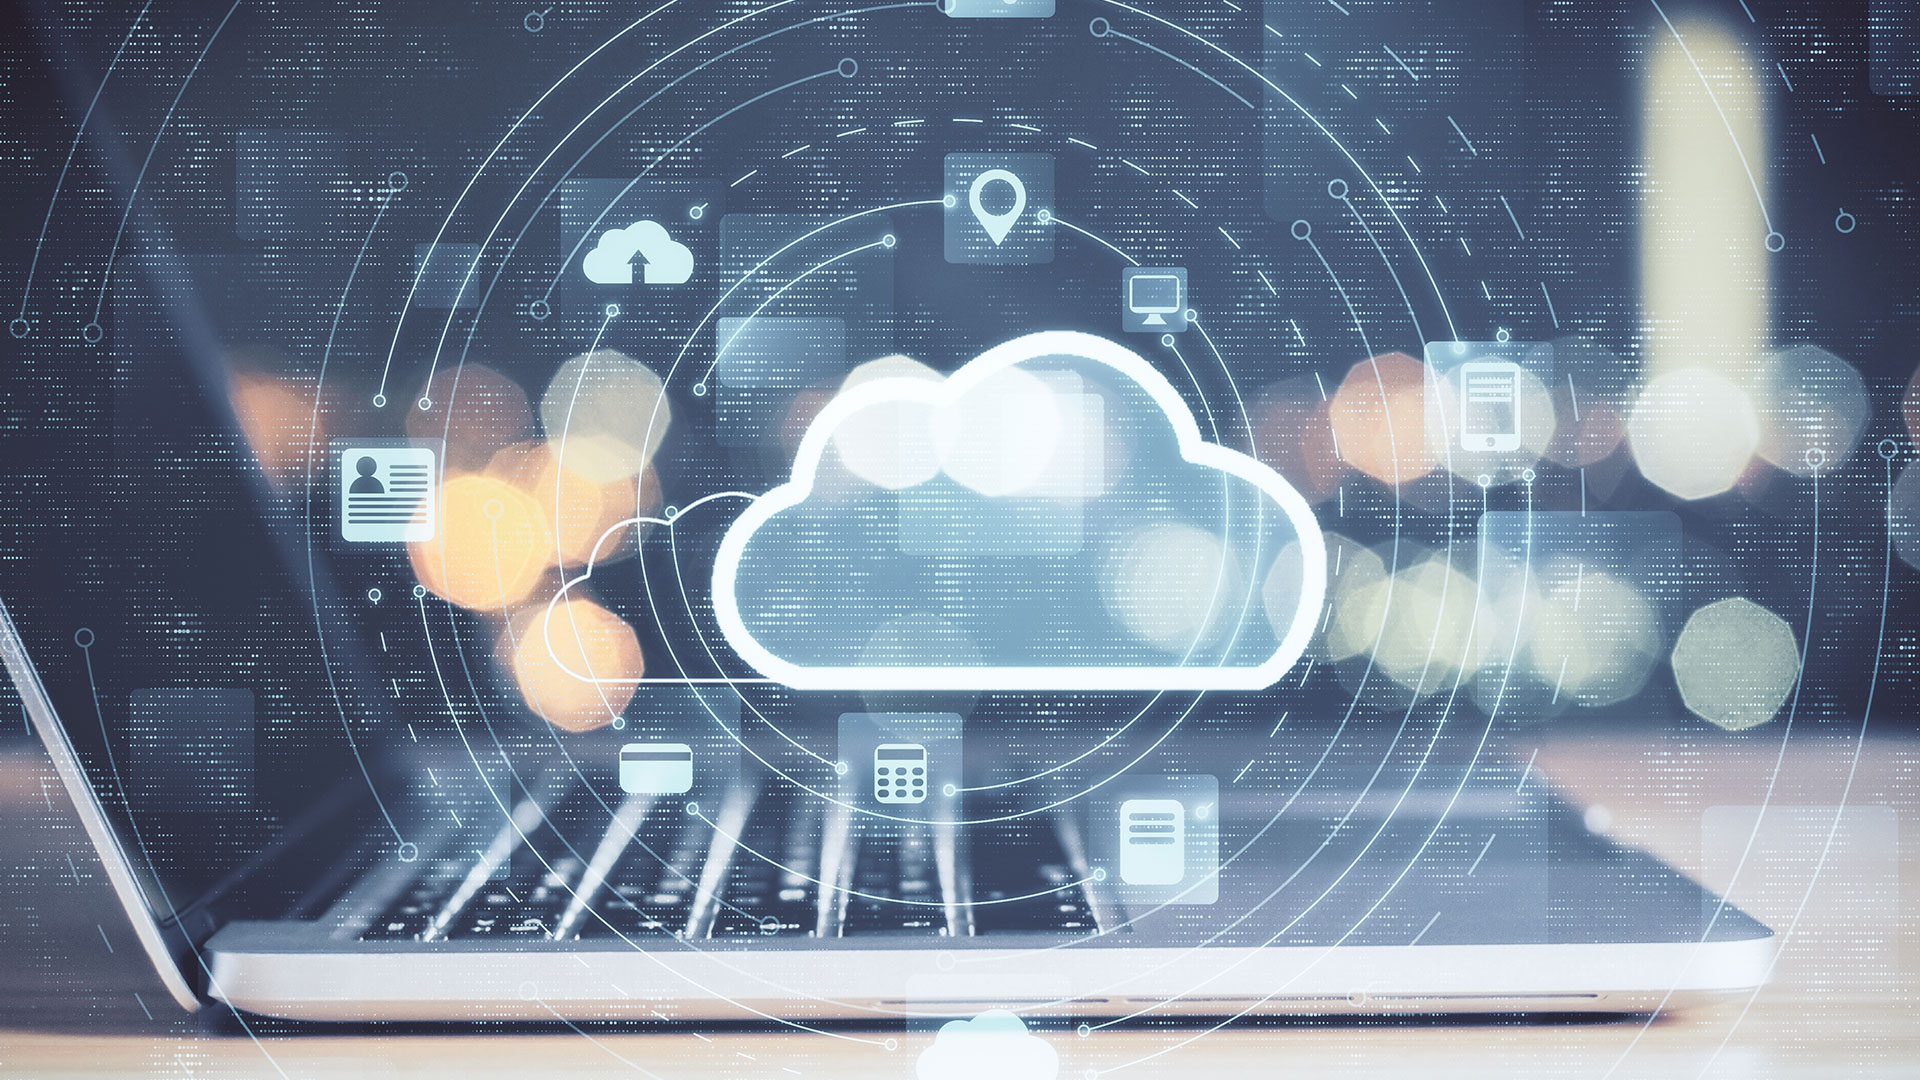 The advantages to small businesses of using a cloud computing server